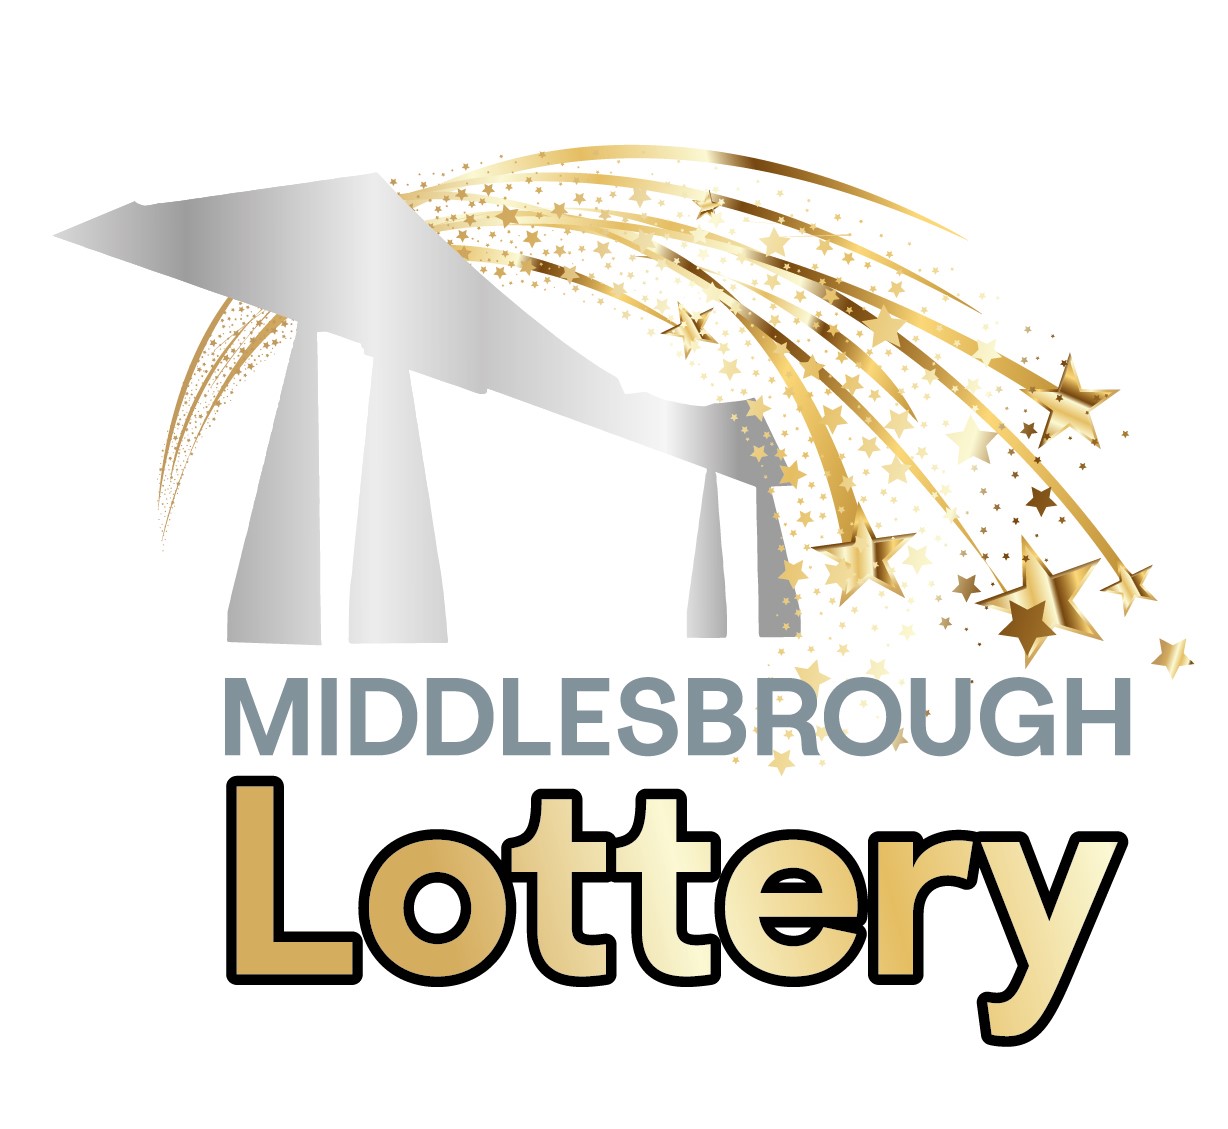 Middlesbrough Lottery